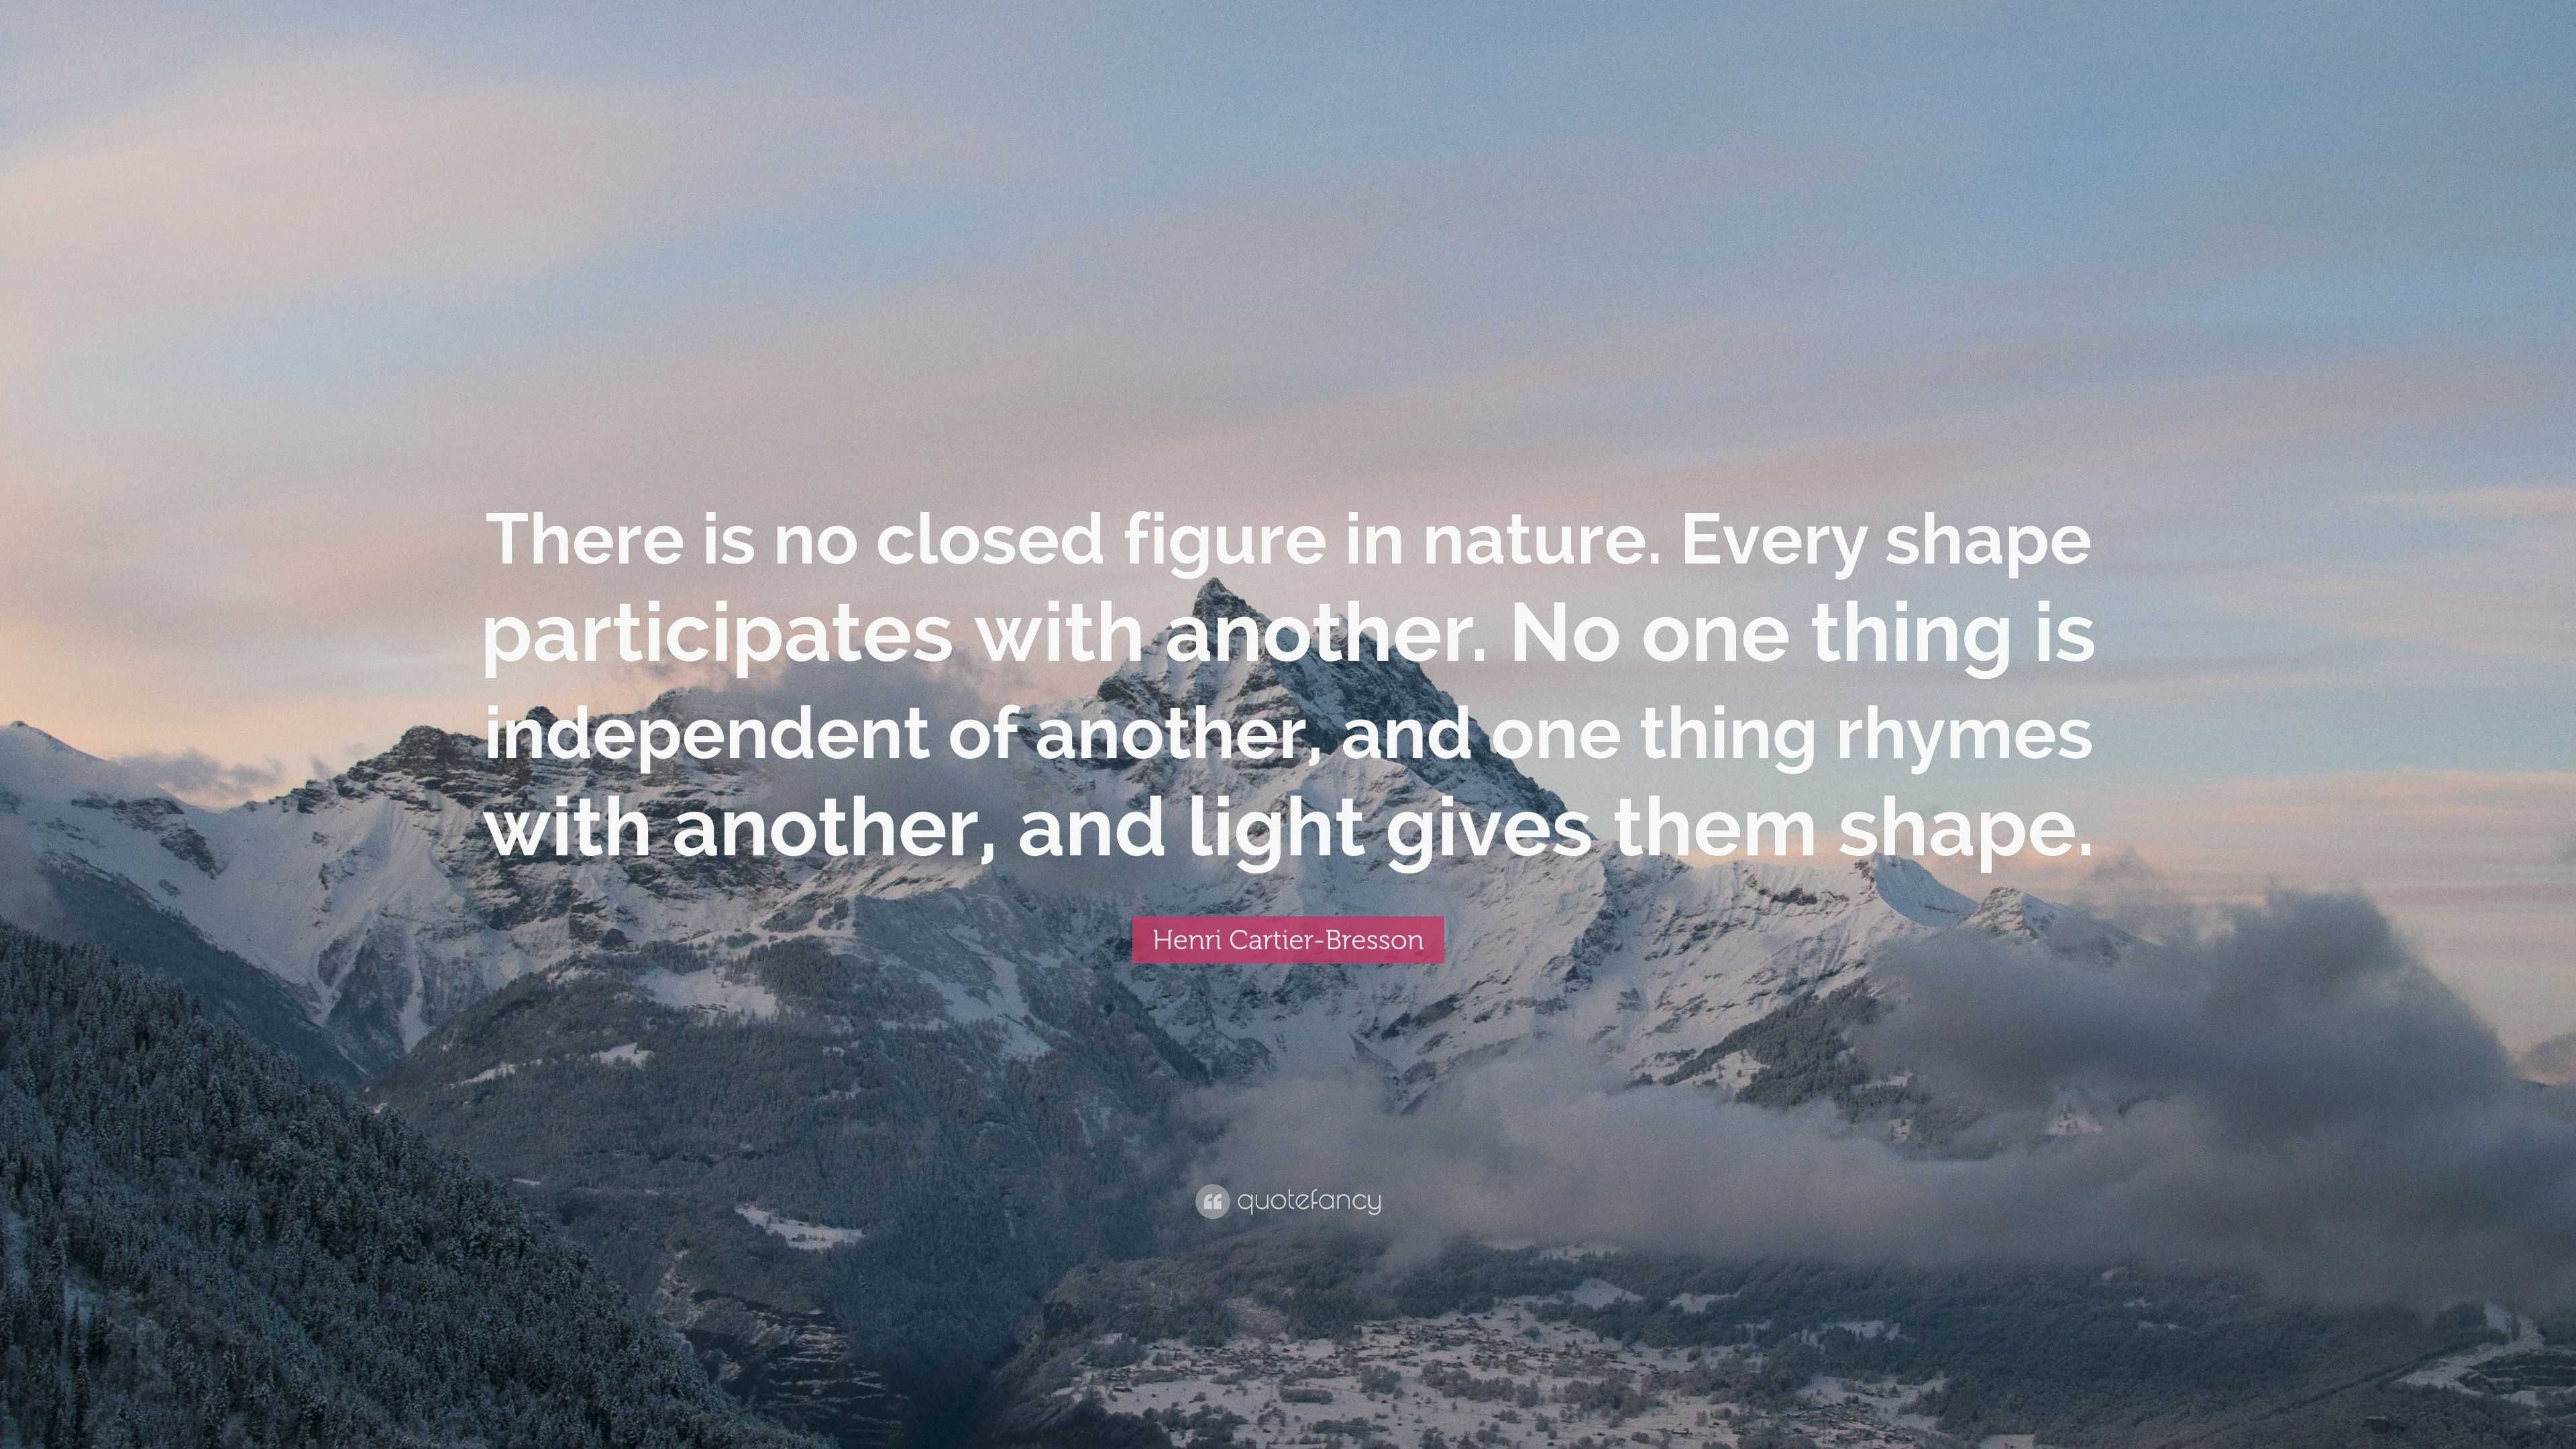 Henri Cartier-Bresson Quote: “There is no closed figure in nature ...